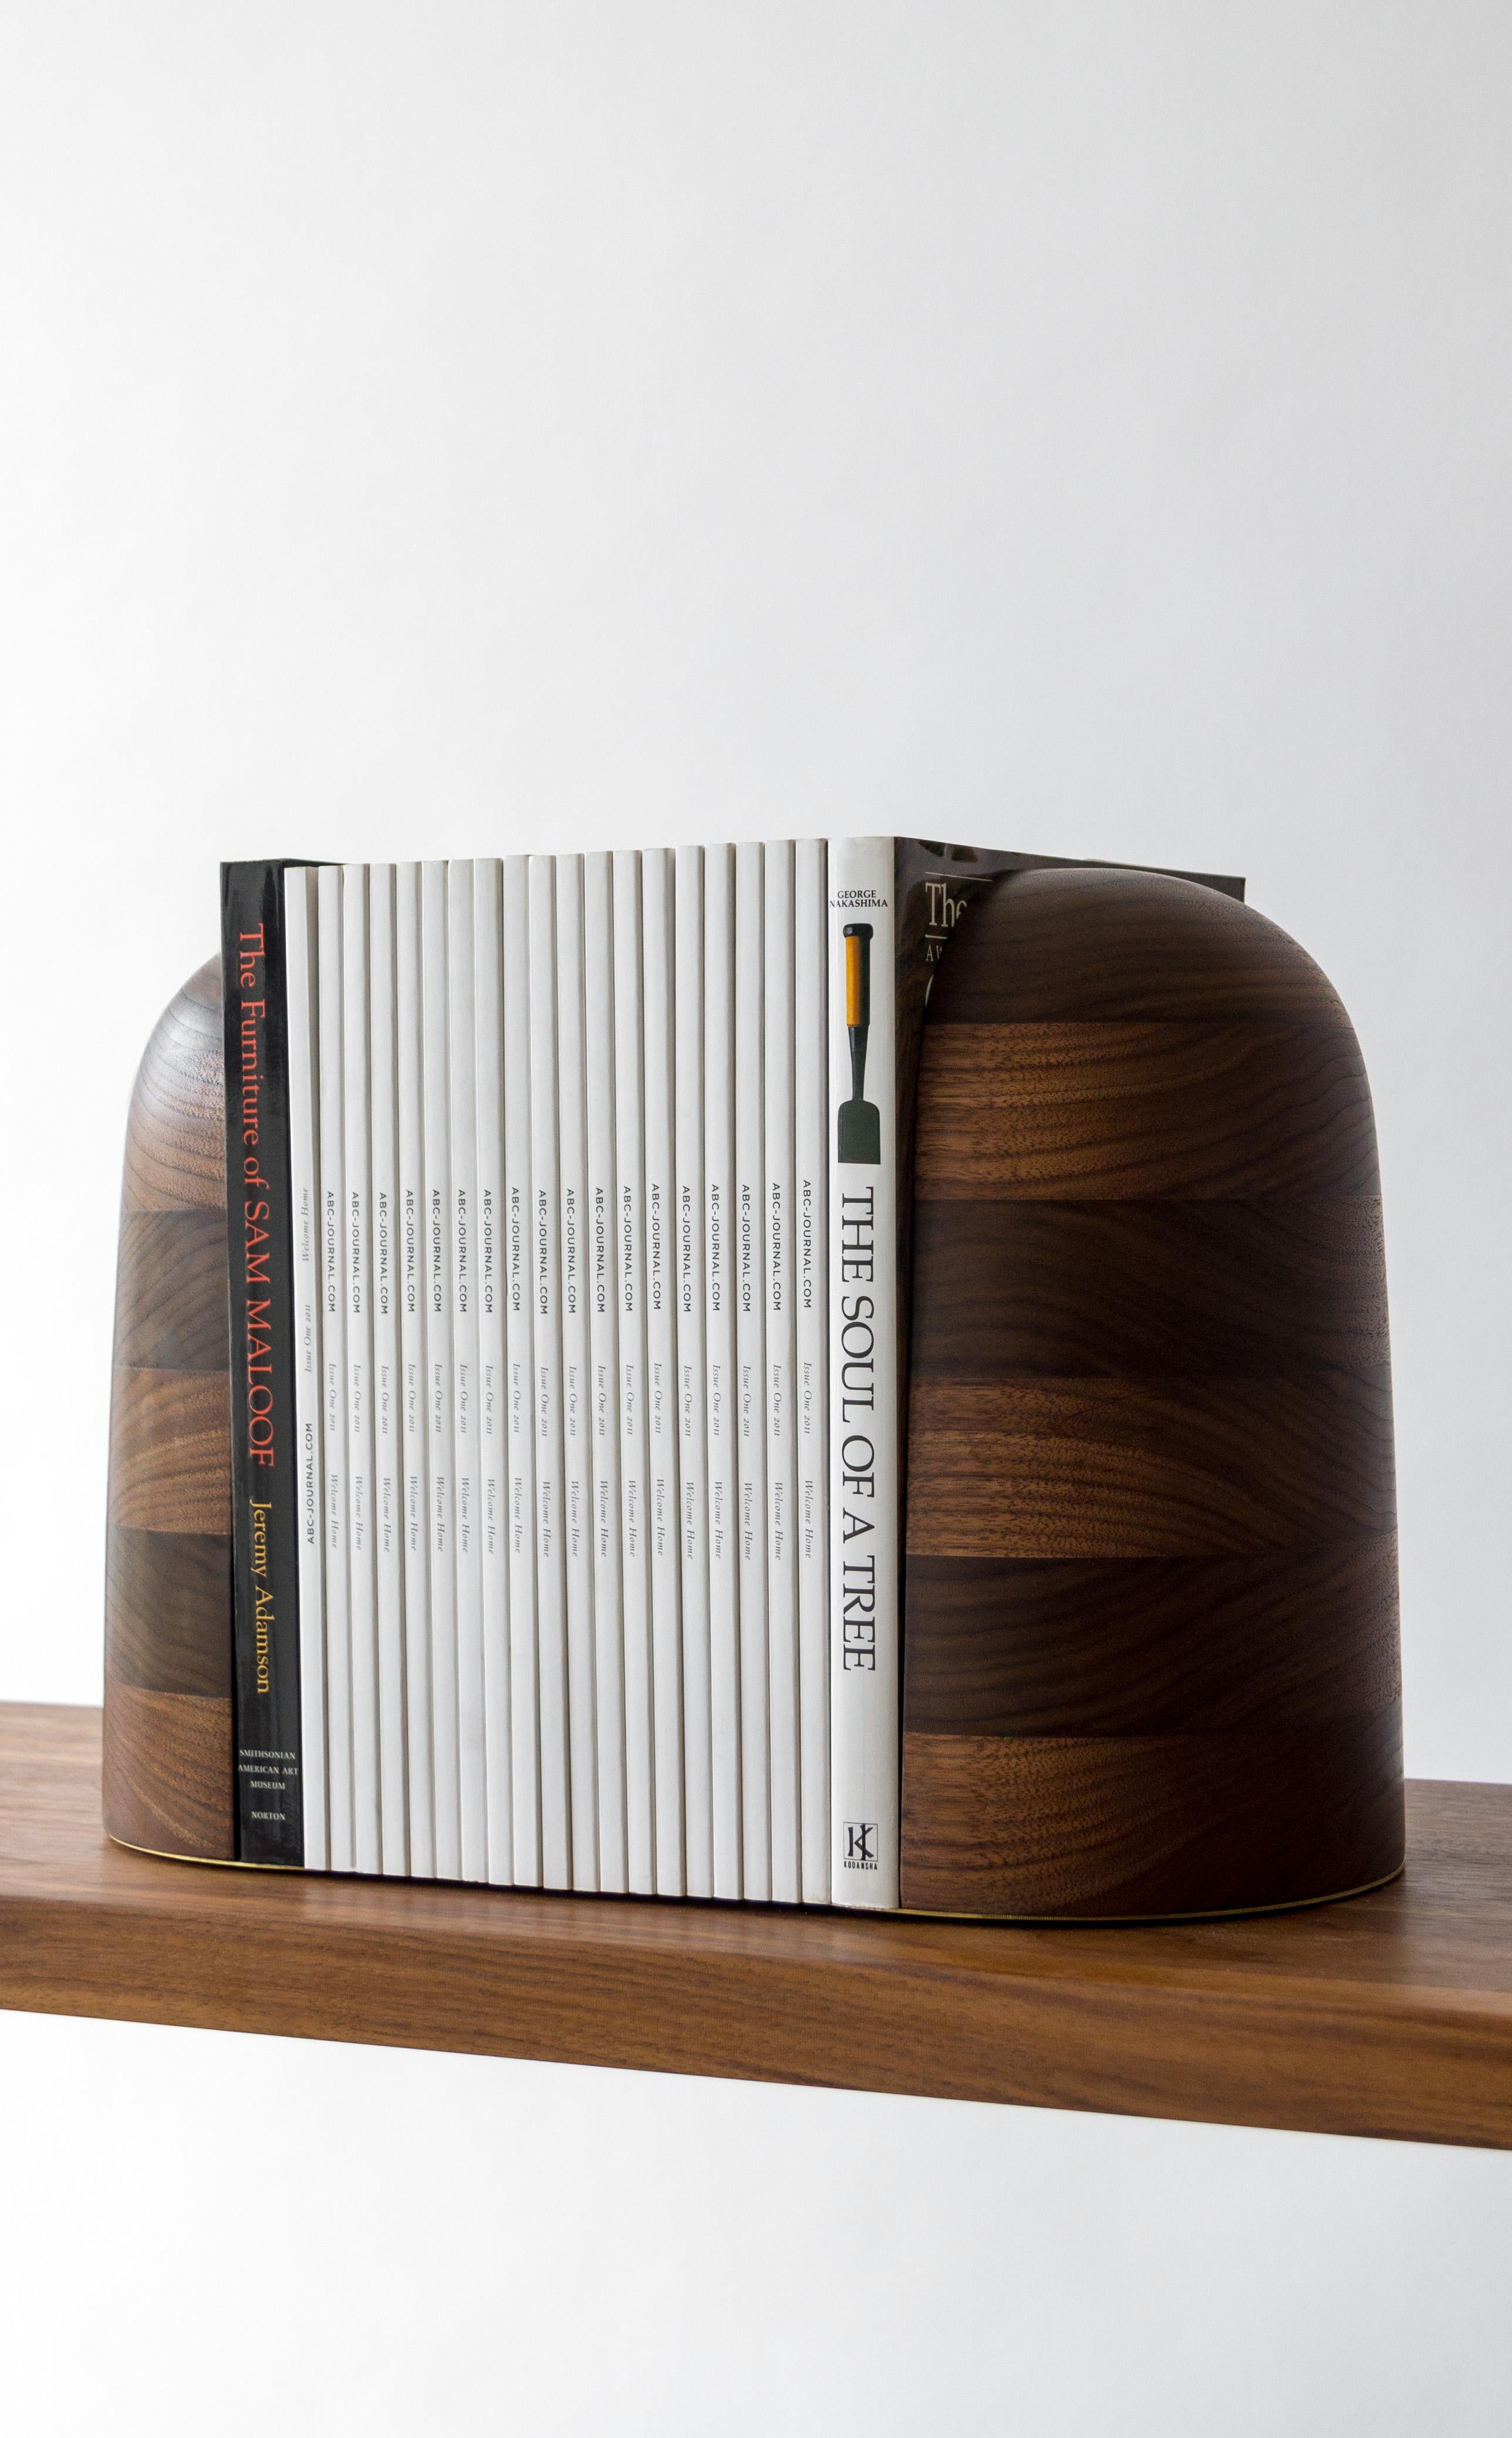 Hand-turned bookstops in selectively ebonized walnut with brass detailing. These beautiful and functional book ends come in a hand rubbed oil finish and are also available in maple and blackened steel. Bookends are sized to fit paperbacks up to